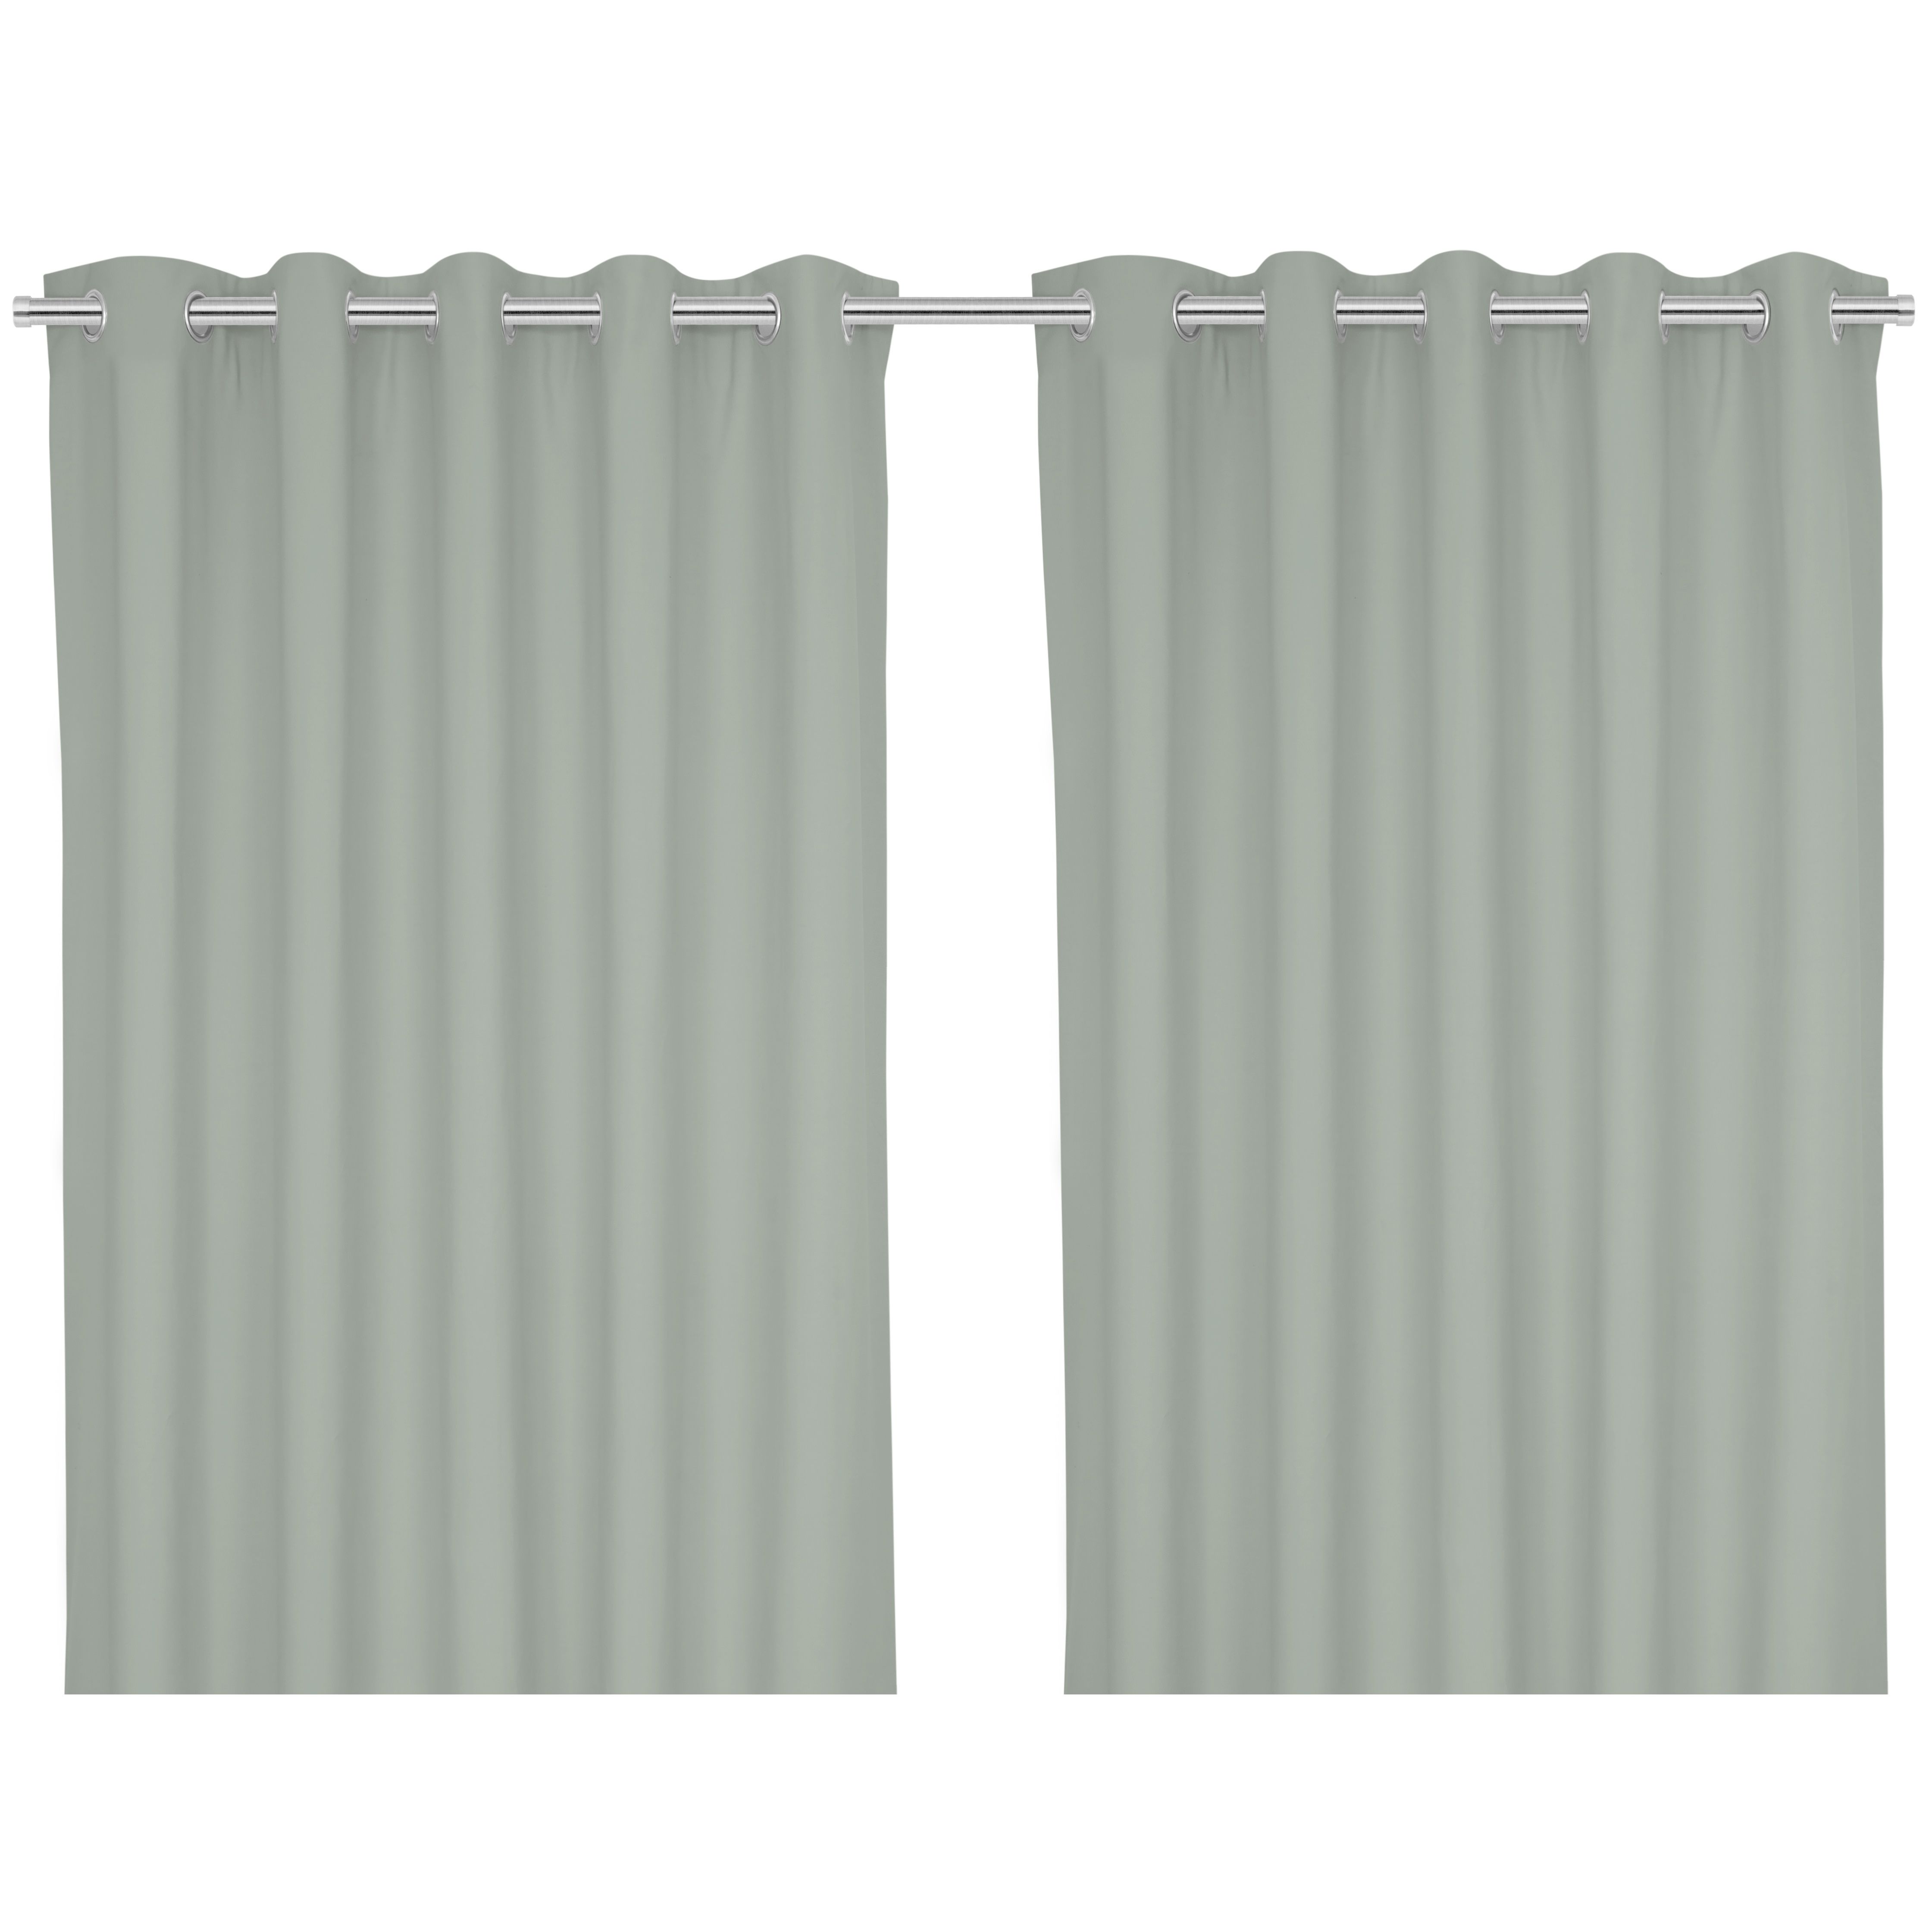 Hiva Light grey Solid dyed Lined Eyelet Curtain (W)228cm (L)228cm, Pair